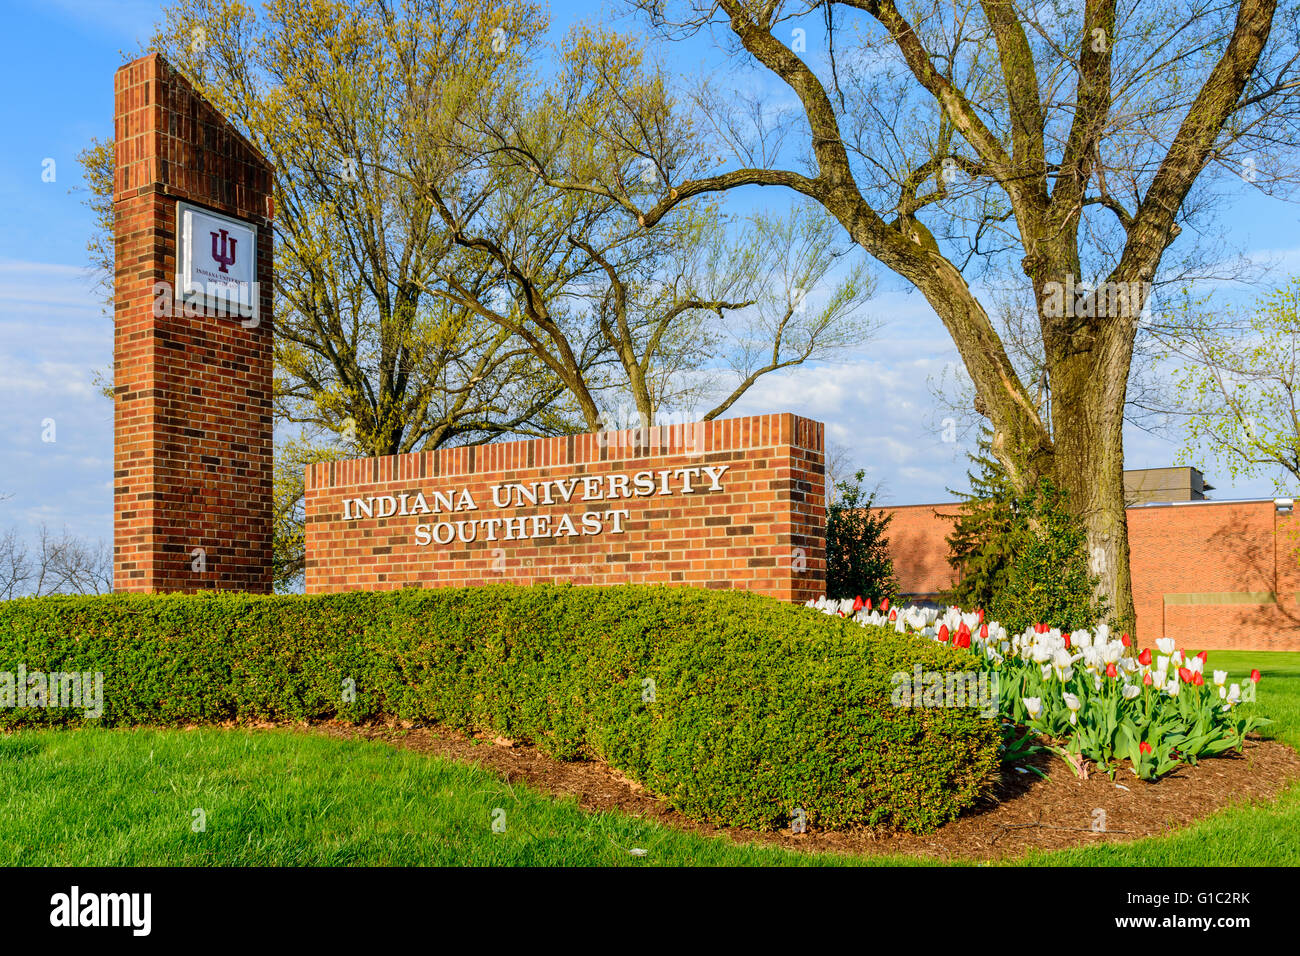 NEW ALBANY, Indiana, USA - 10 avril 2016 : Entrée principale de Indiana University Southeast New Albany Indiana. Banque D'Images